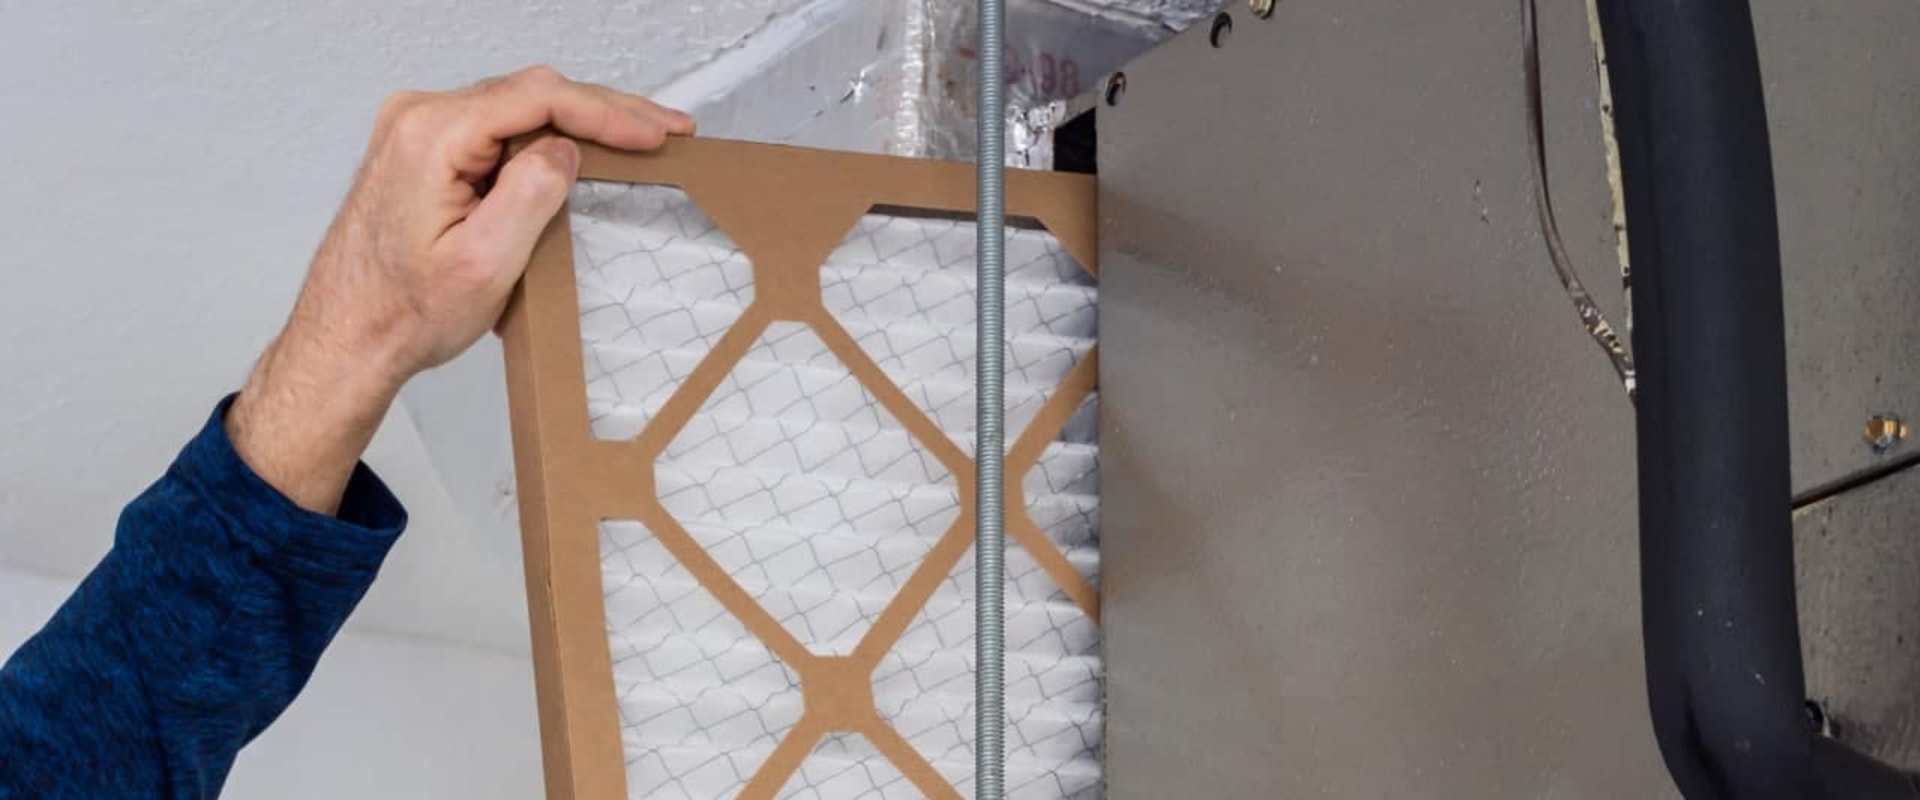 Can I Put a 1 Inch Furnace Filter Instead of 5? - An Expert's Perspective